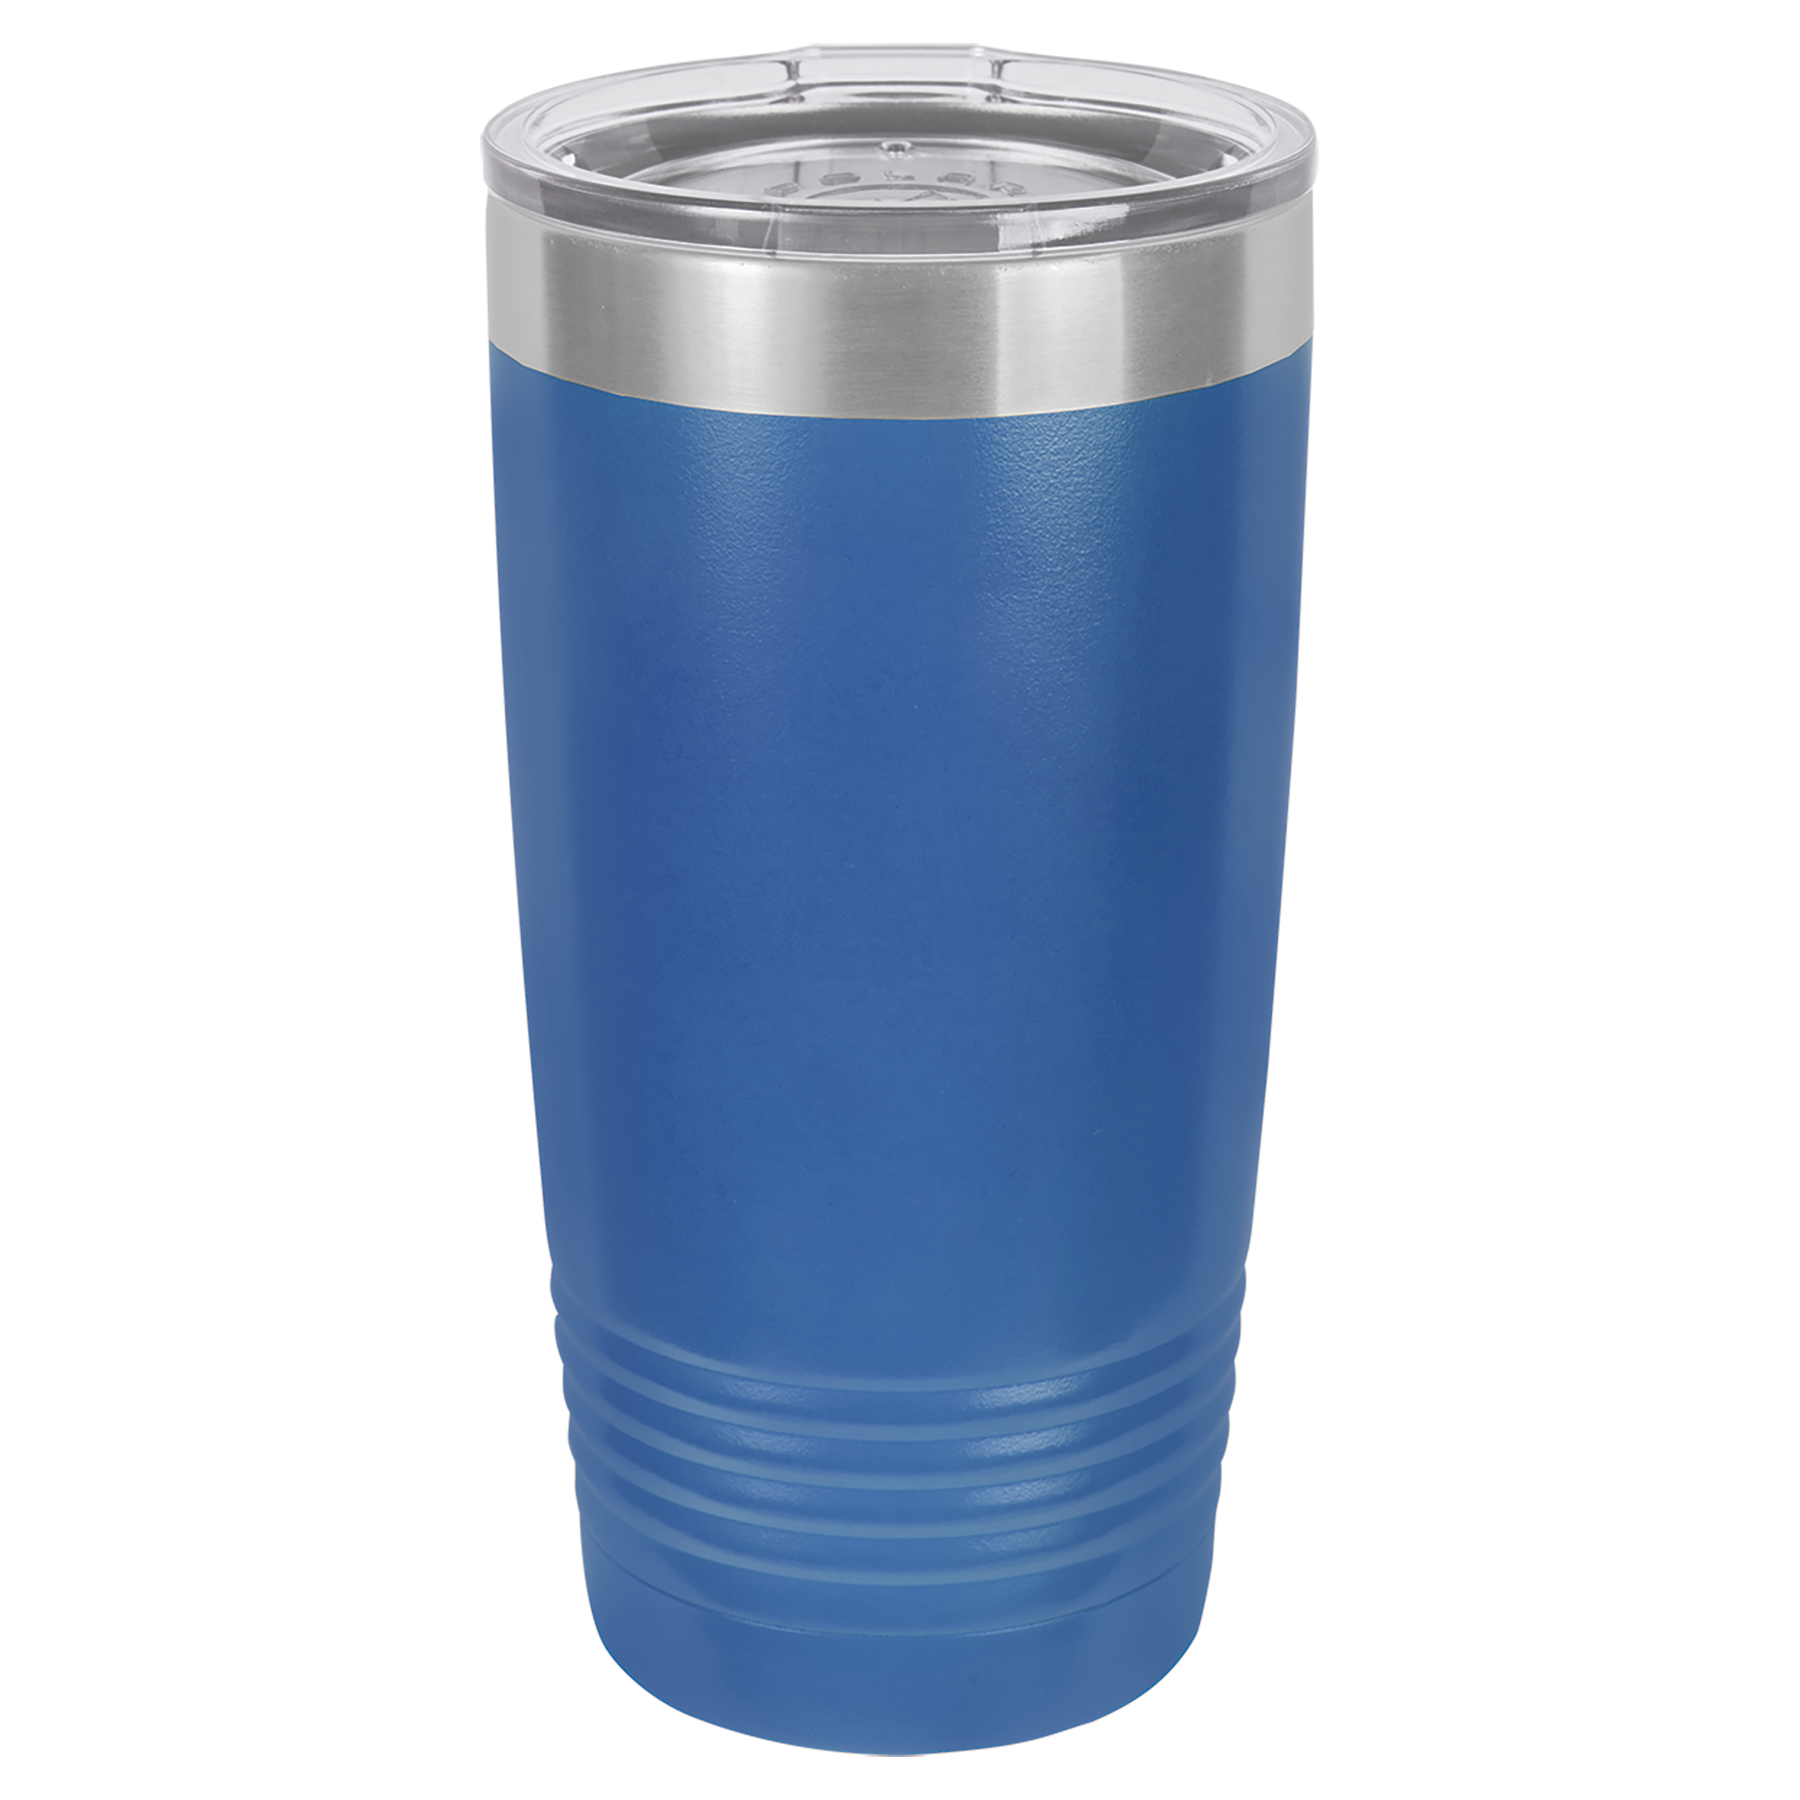 Engraved Blue 20oz Tumbler. double-wall vacuum insulation with slider lid 18/8 gauge stainless steel (18% chromium/8% nickel) - also known as Type 304 Food Grade. Dishwasher Safe. Personalize with your name or a custom saying. Great for Company Logo and Branding.